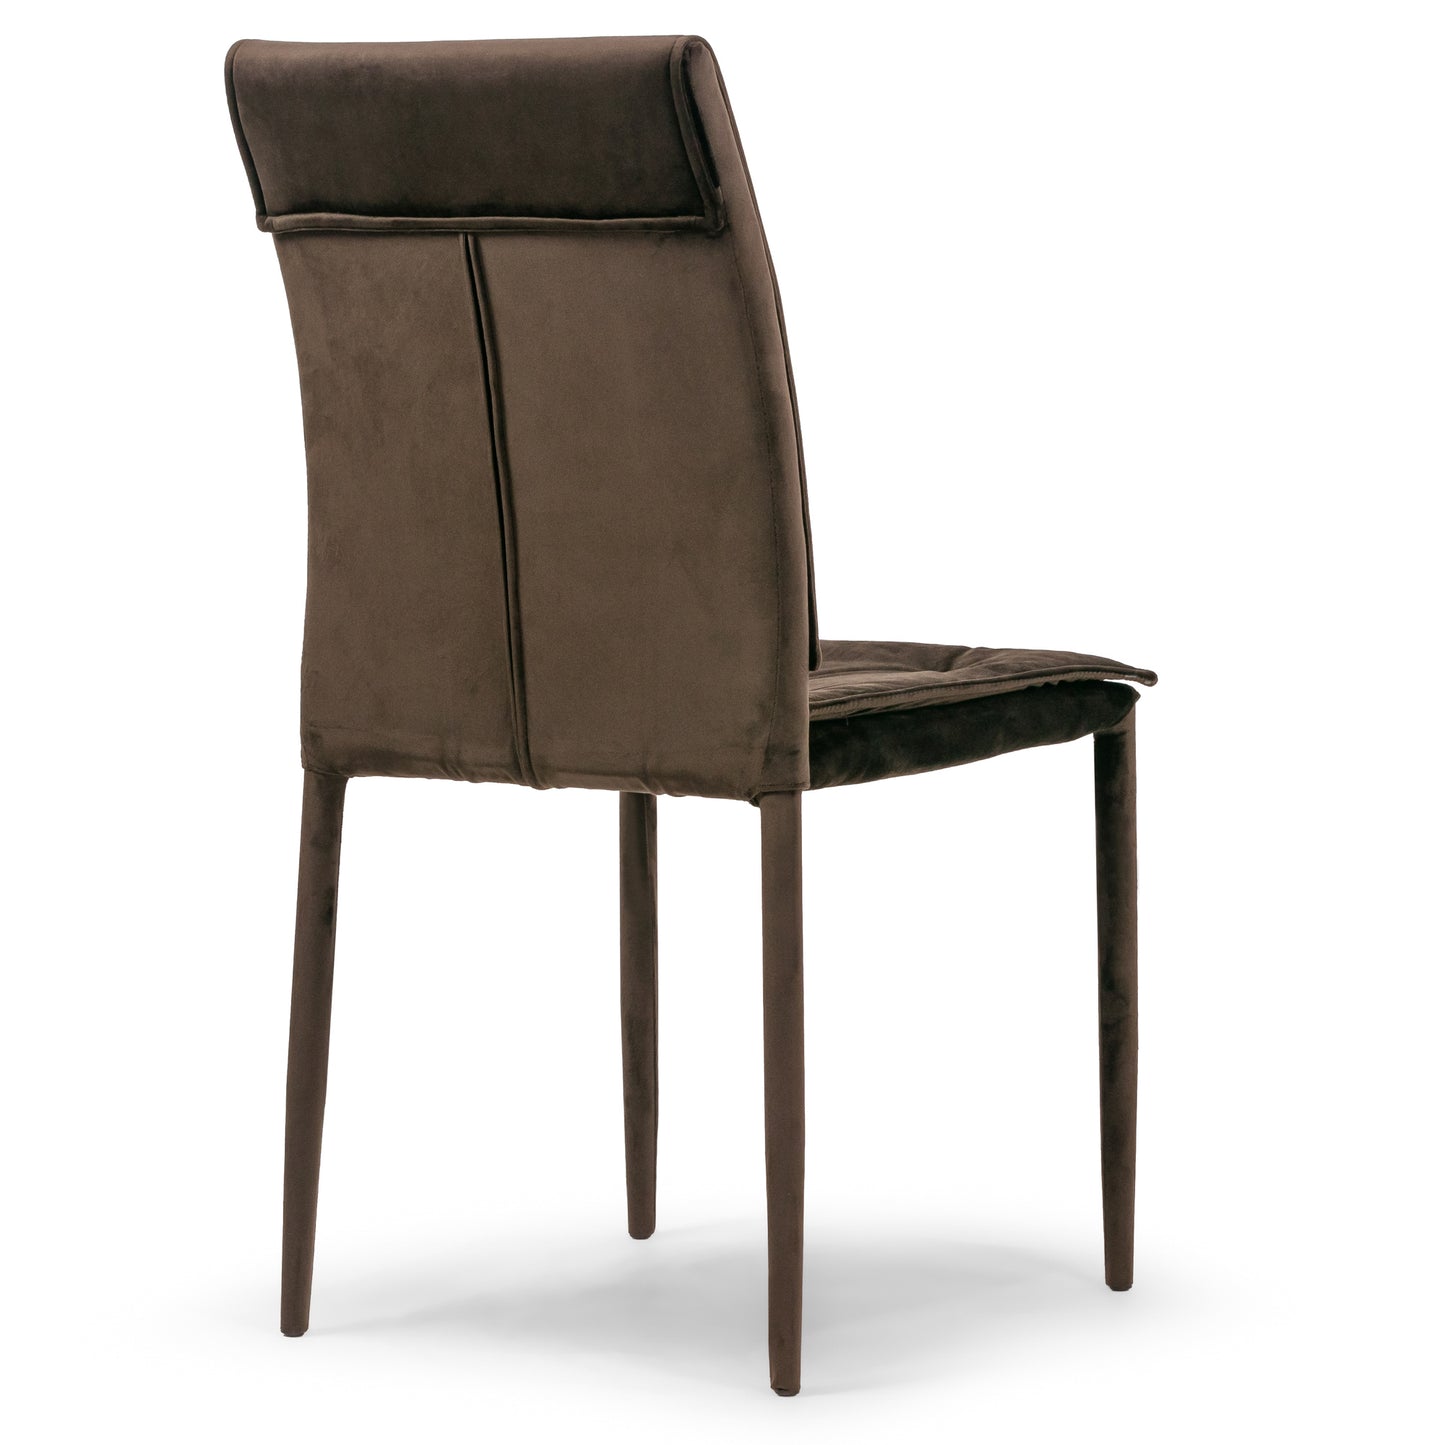 Set of 2 Areli Brown Velvet Dining Chair with Upholstered Legs